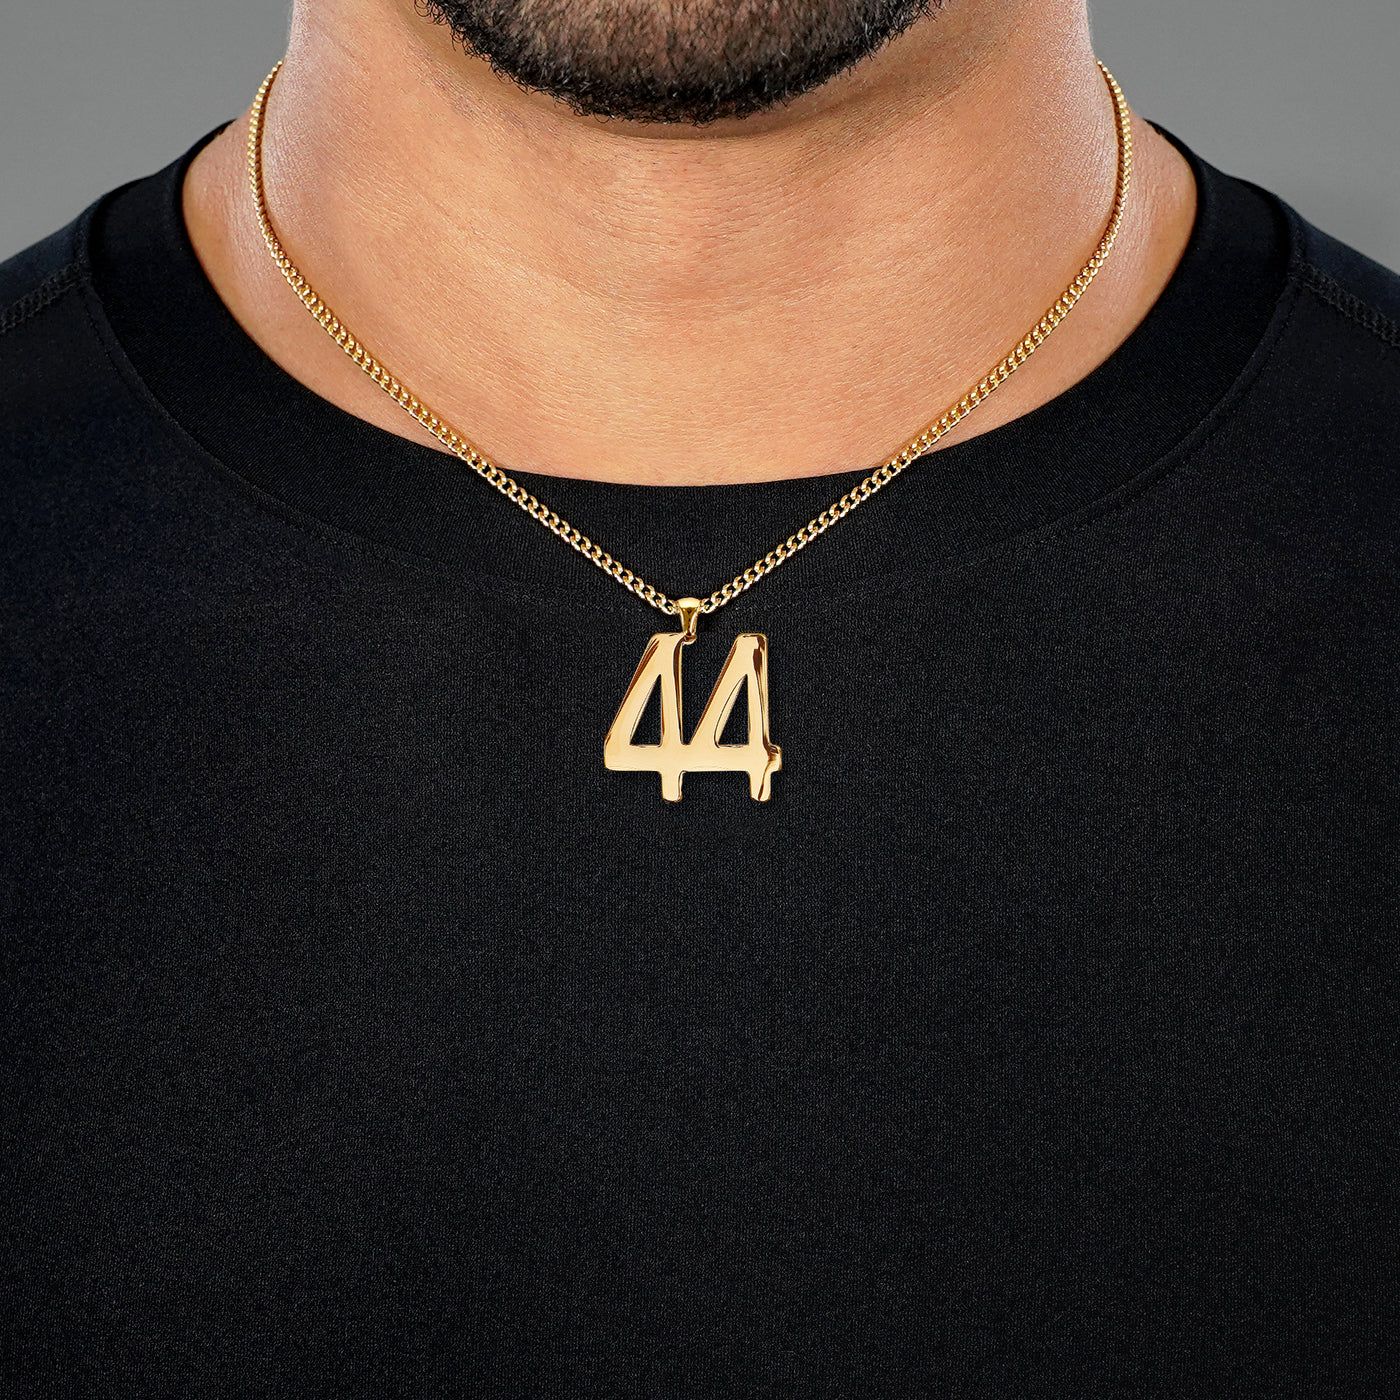 44 Number Pendant with Chain Necklace - Gold Plated Stainless Steel